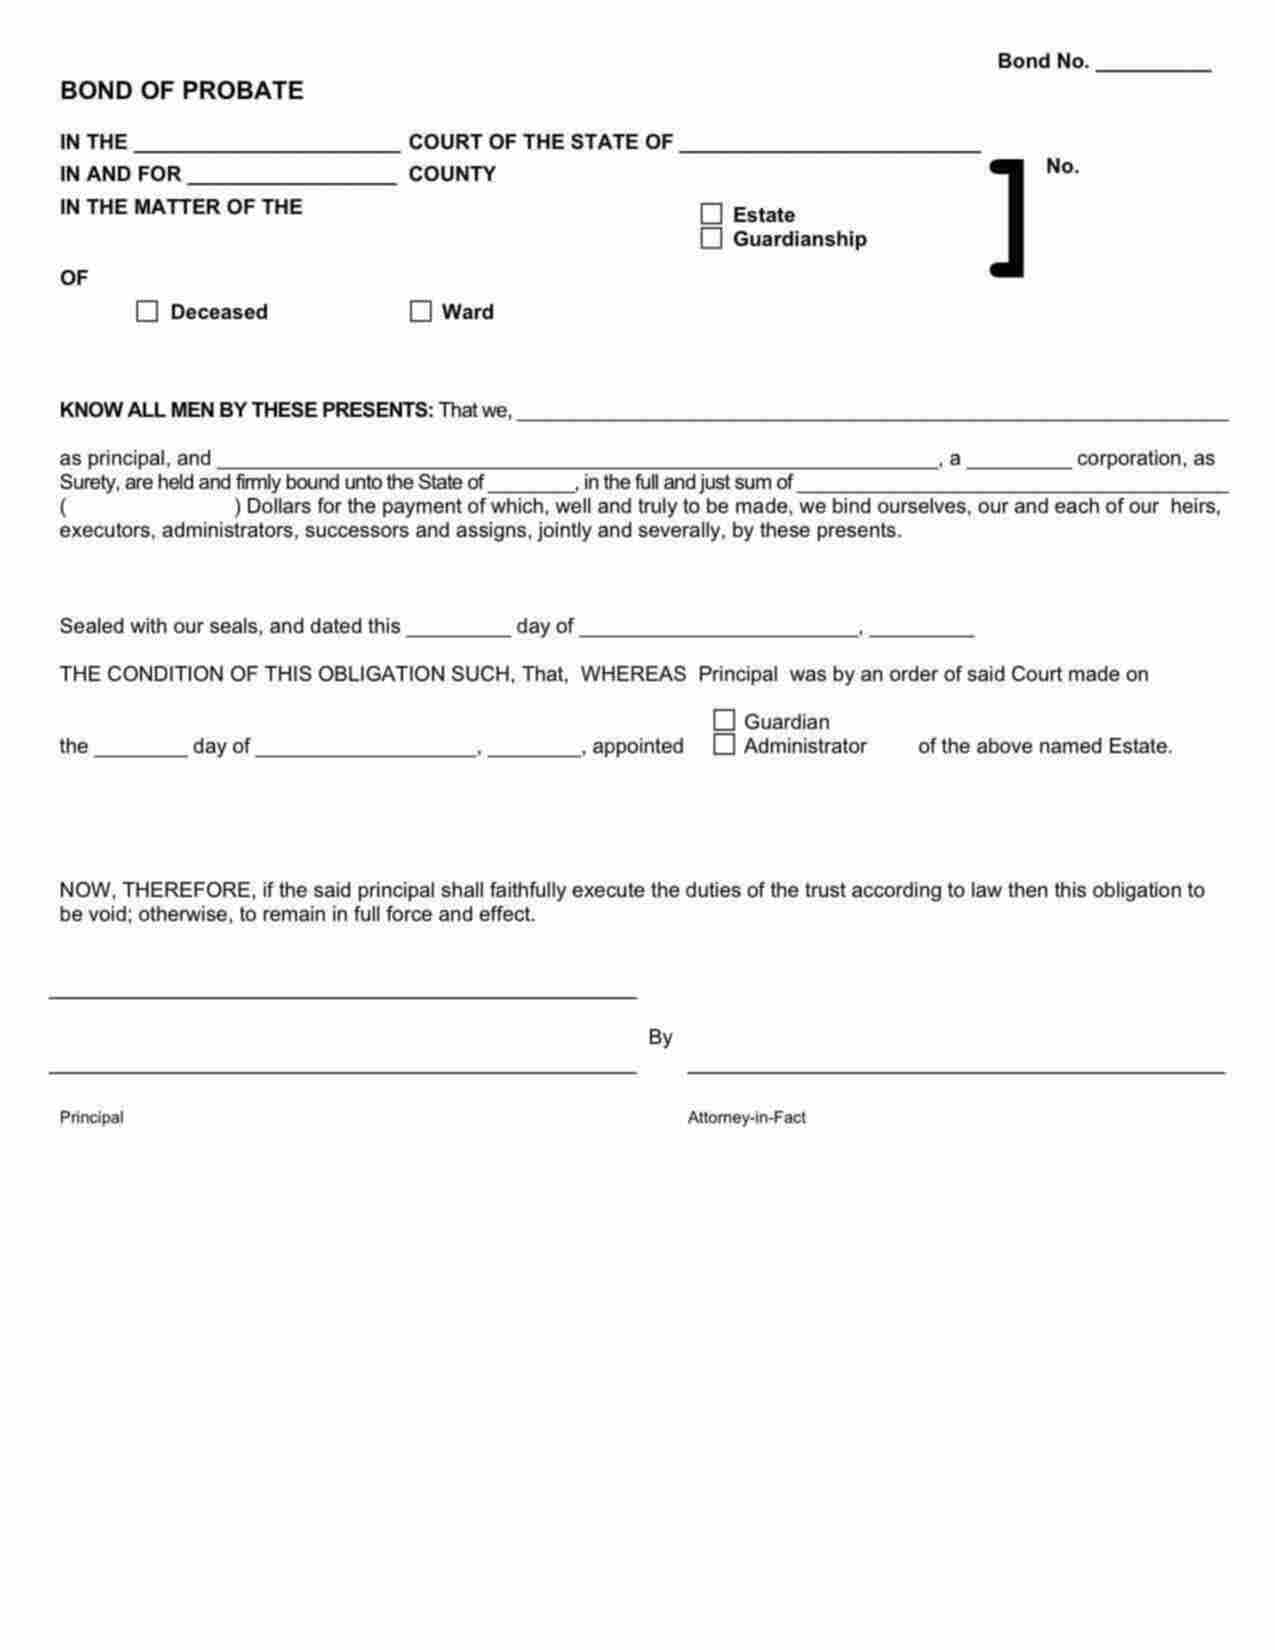 New Mexico Probate Administrator, Executor, Conservator, or Guardian Bond Form